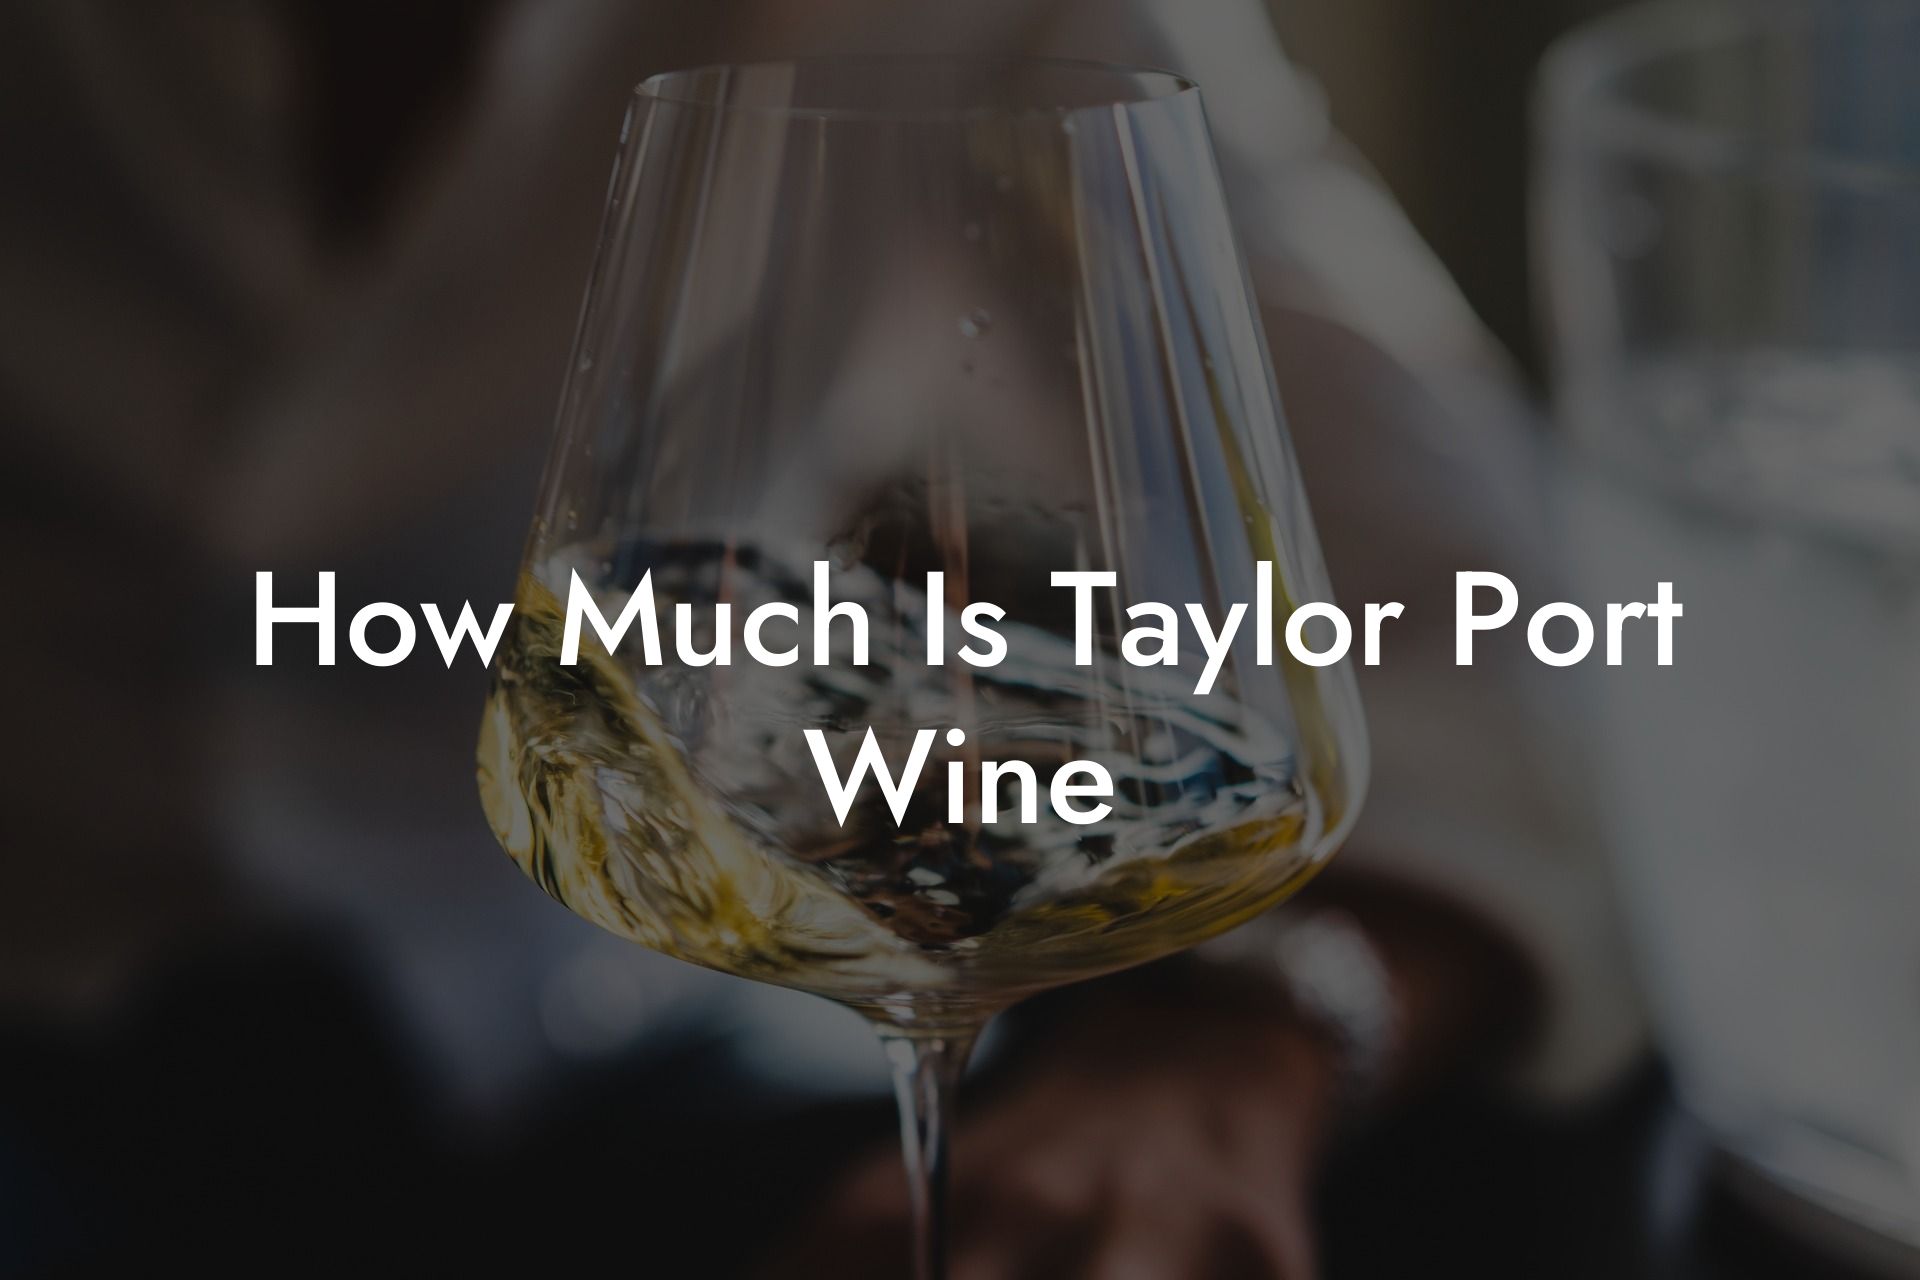 How Much Is Taylor Port Wine